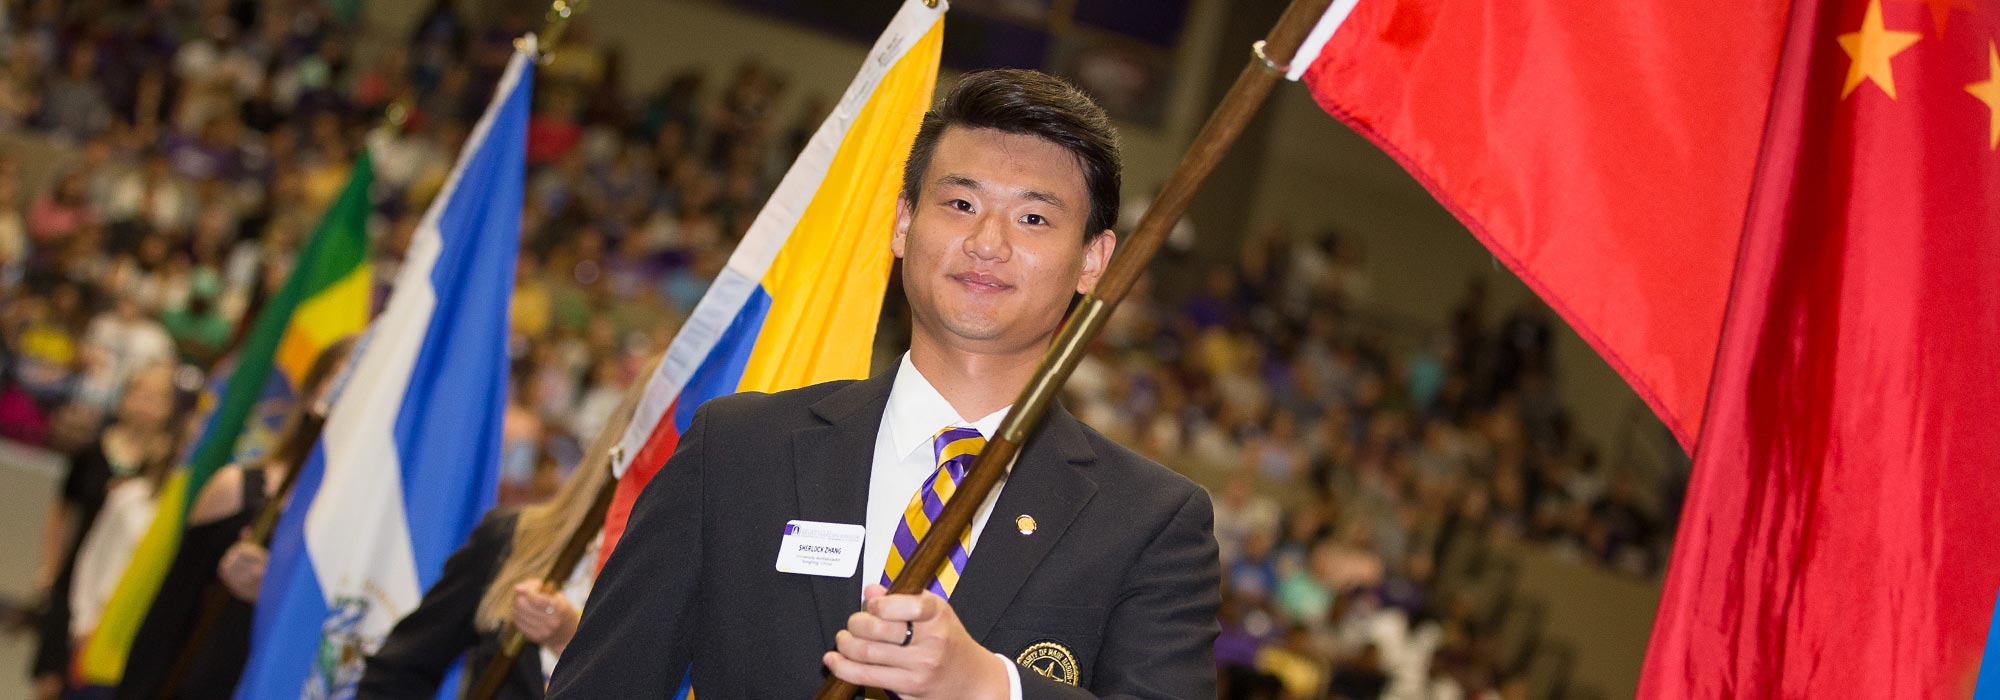 Can International Students Work While Enrolled at UMHB?